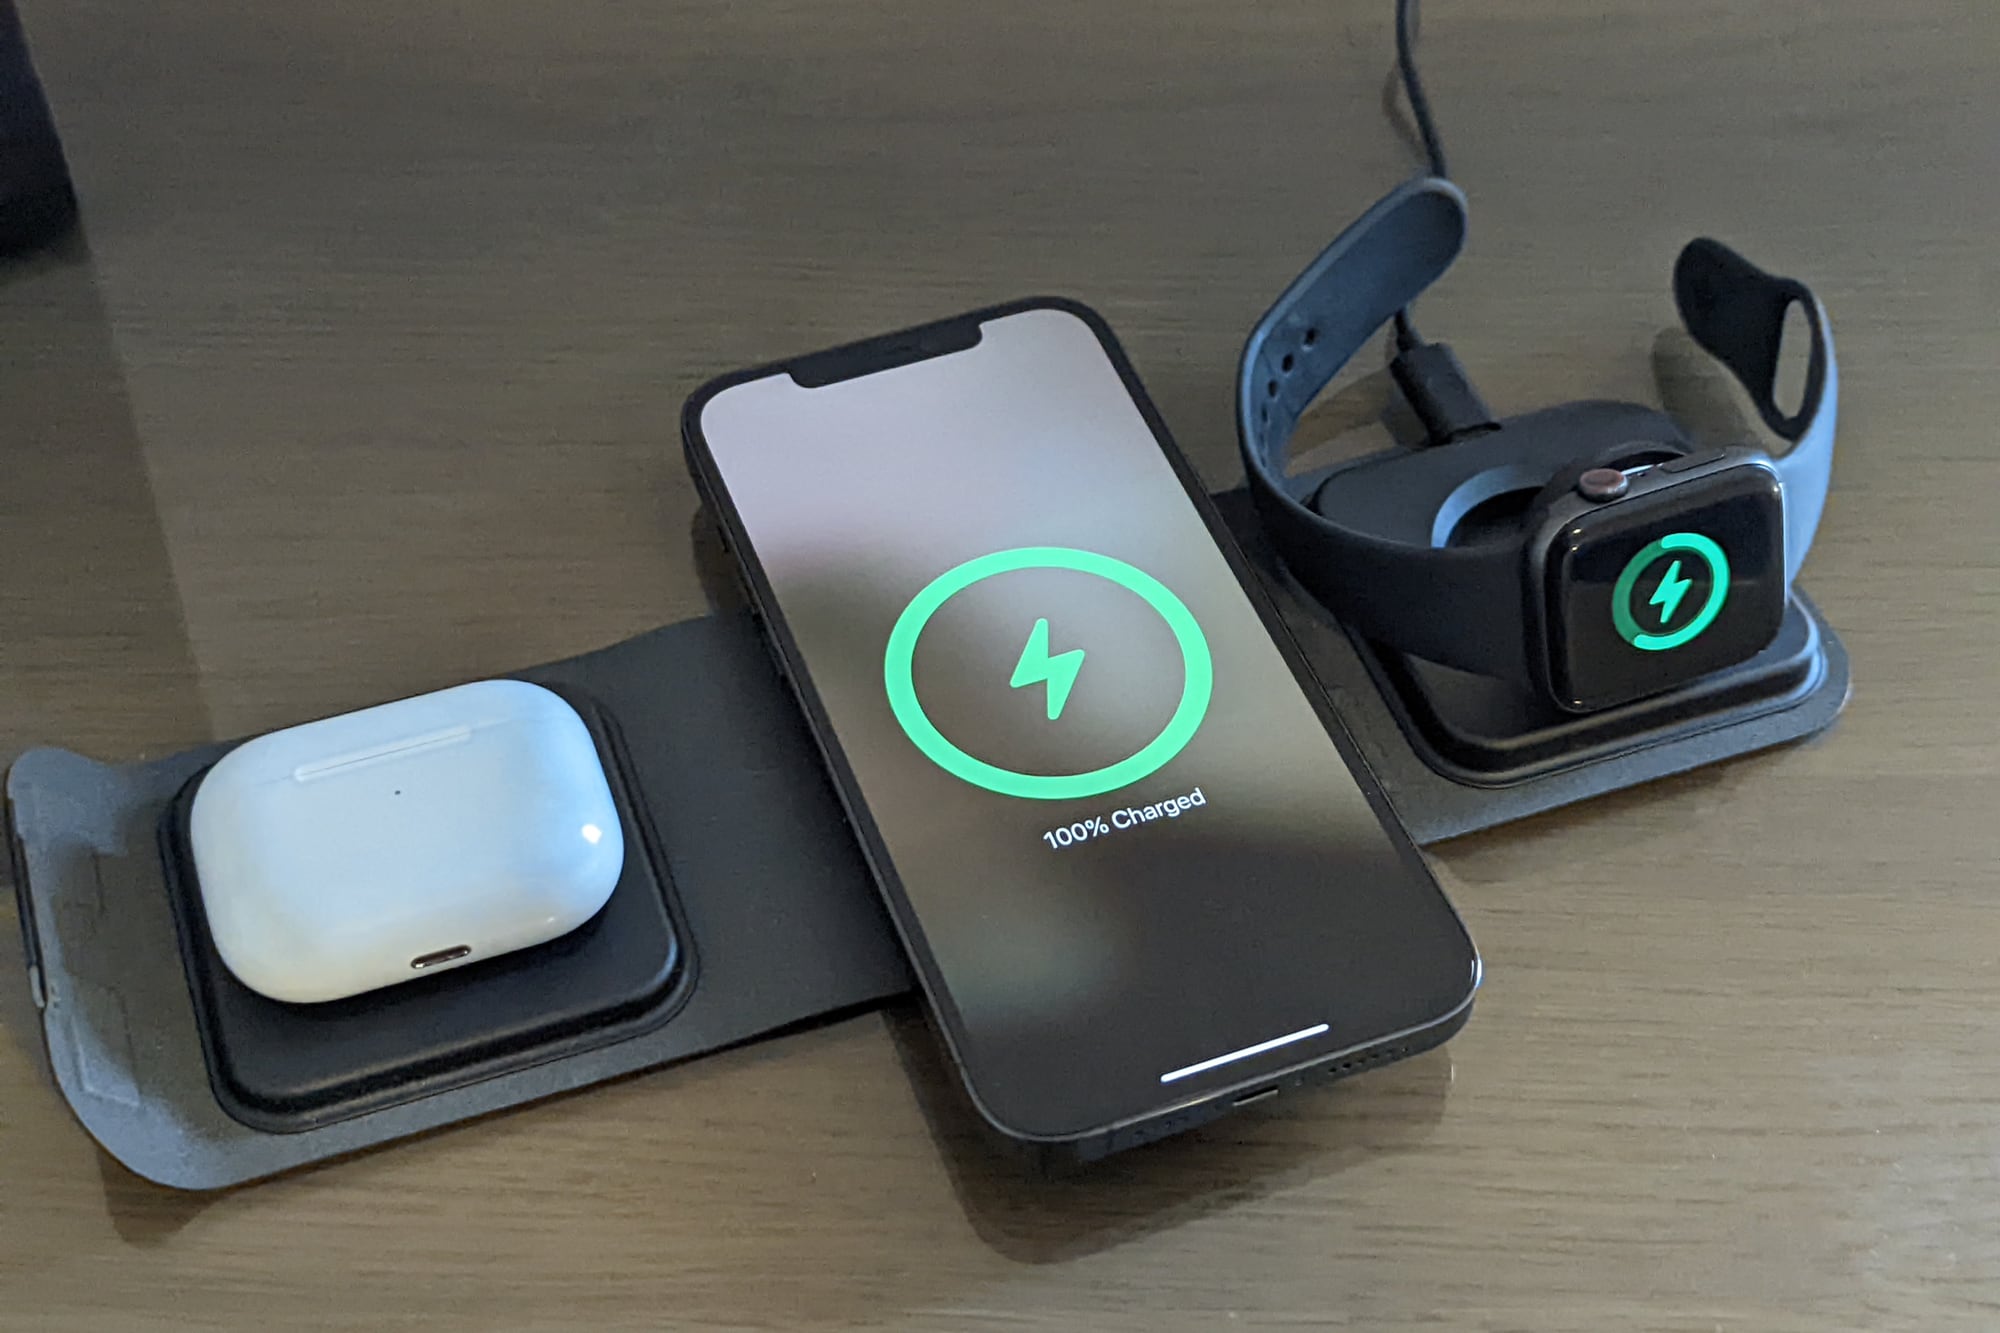 Mophie 3-in-1 MagSafe travel charger with AirPod Pro, iPhone 12 Pro Max, and Apple Watch Series 5 charging on top.